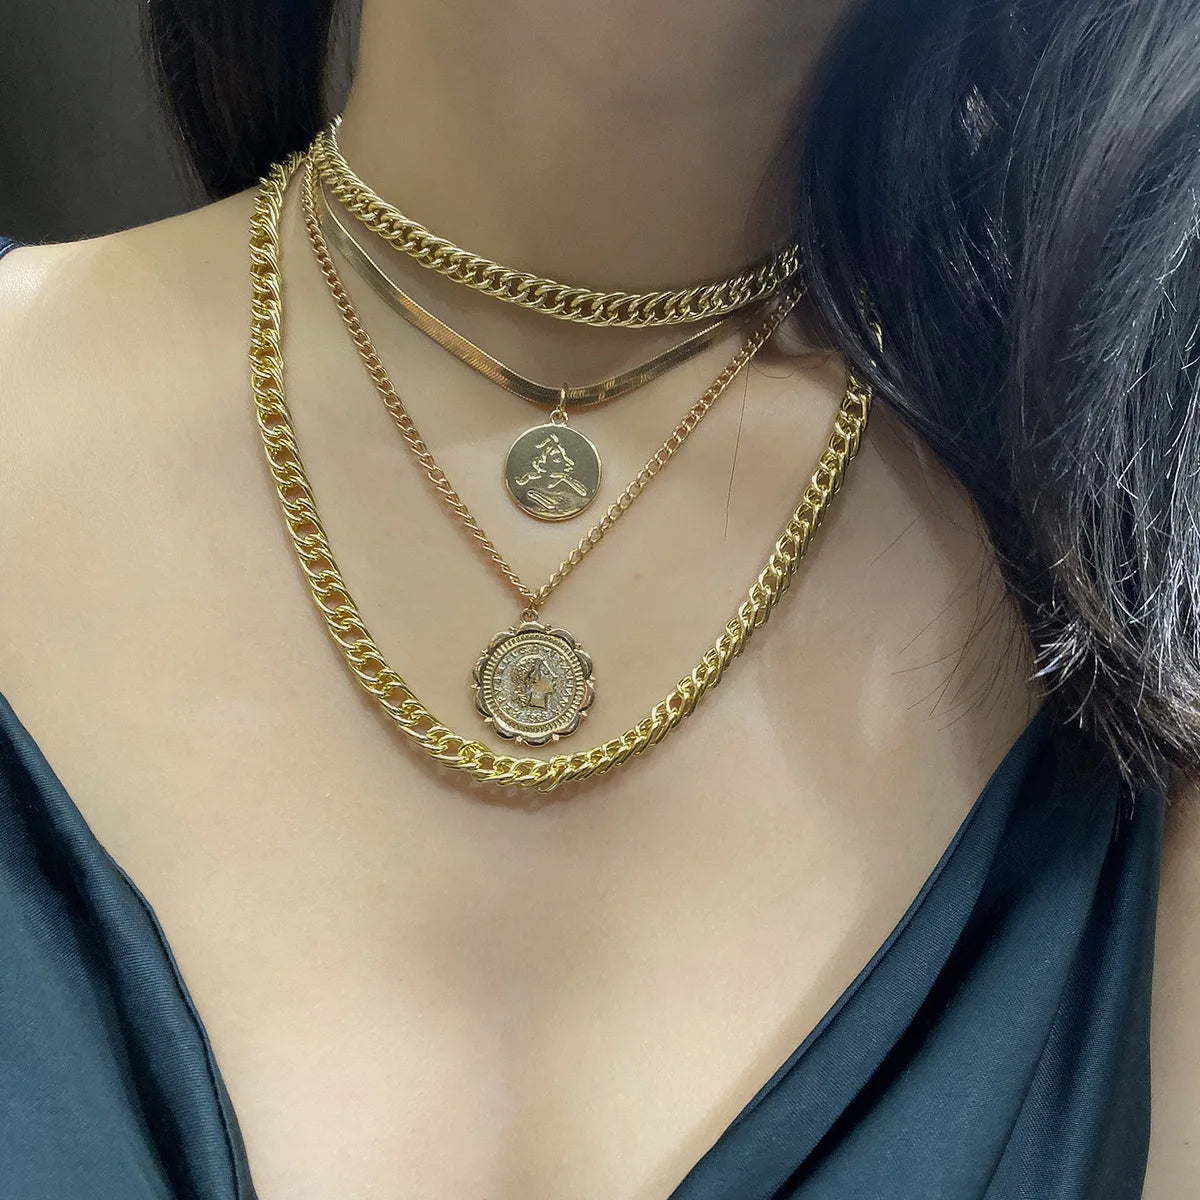 Thick chain with four layers, two layers of chain and two layers of pendant